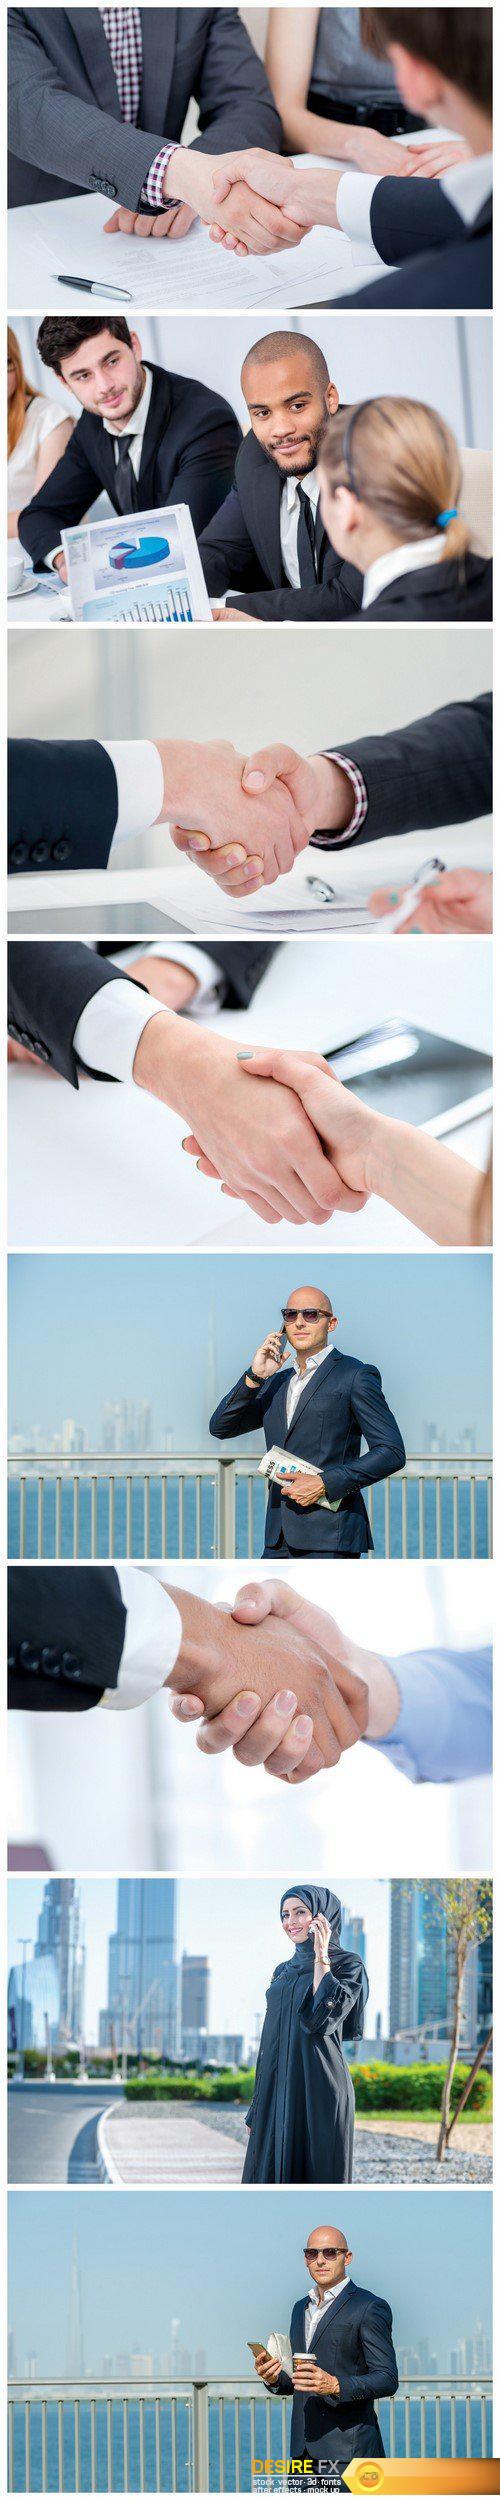 Confirmation of the transaction Business shaking hands in the office 8X JPEG